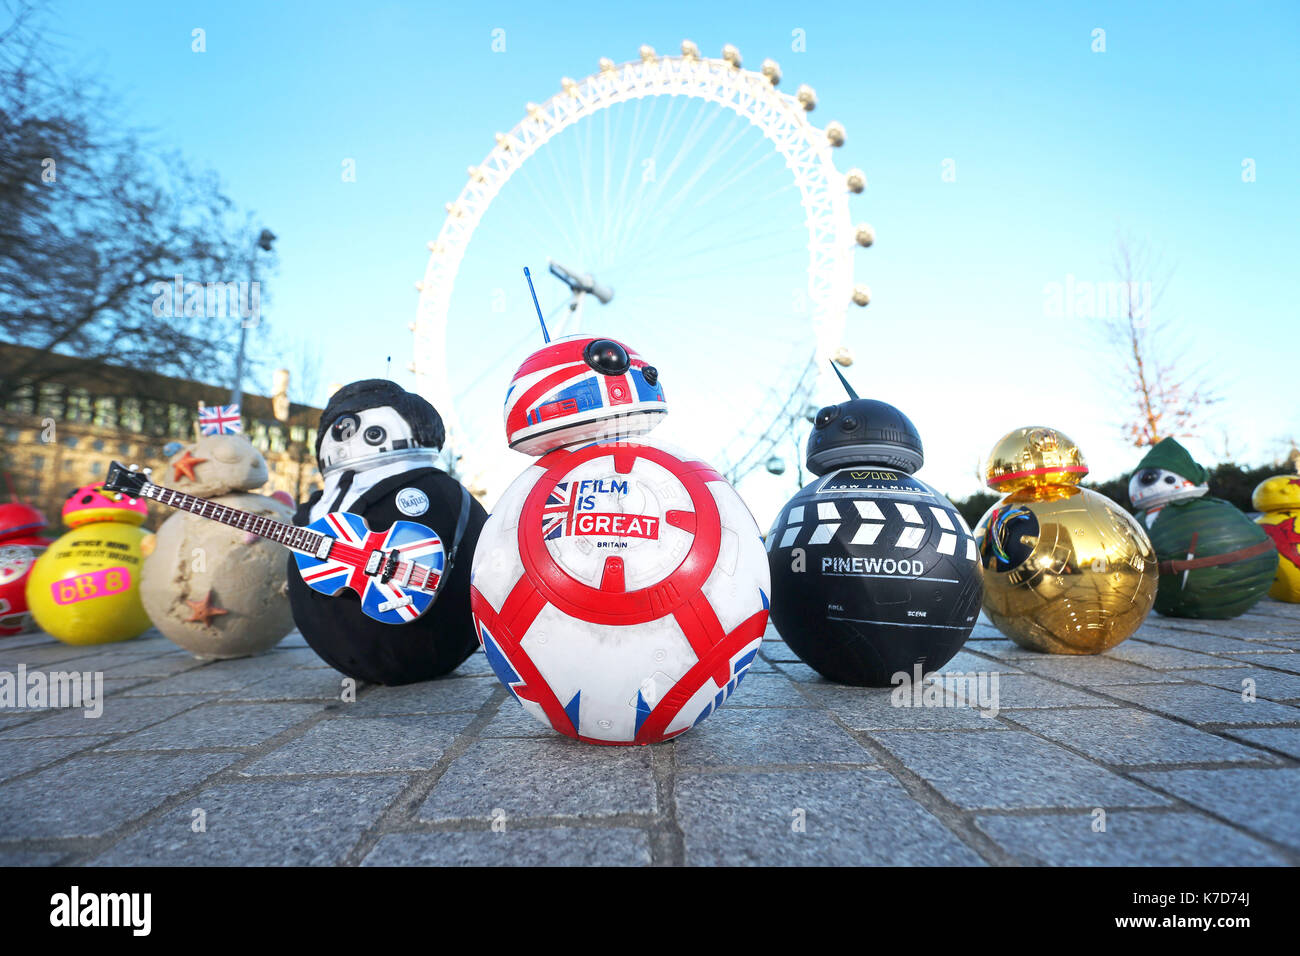 Photo Must Be Credited ©Alpha Press 065630 18/04/2016 Celebrity Designed BB-8s Line Up for London Charity Exhibition. A congregation of model droids inspired by BB-8 from Star Wars: The Force Awakens and designed by stars of the film and British celebrities, descend on London ahead of an exhibition opening tomorrow to coincide with the Blu-ray and DVD release of the film.Ê The miniature BB-8 models have been designed by celebrities including Mark Hamill, John Boyega, Daisy Ridley, Anthony Daniels, Warwick Davis, Simon Pegg, Jonathan Ross, Years and Years, Alex Brooker and Paddy McGuinness and  Stock Photo